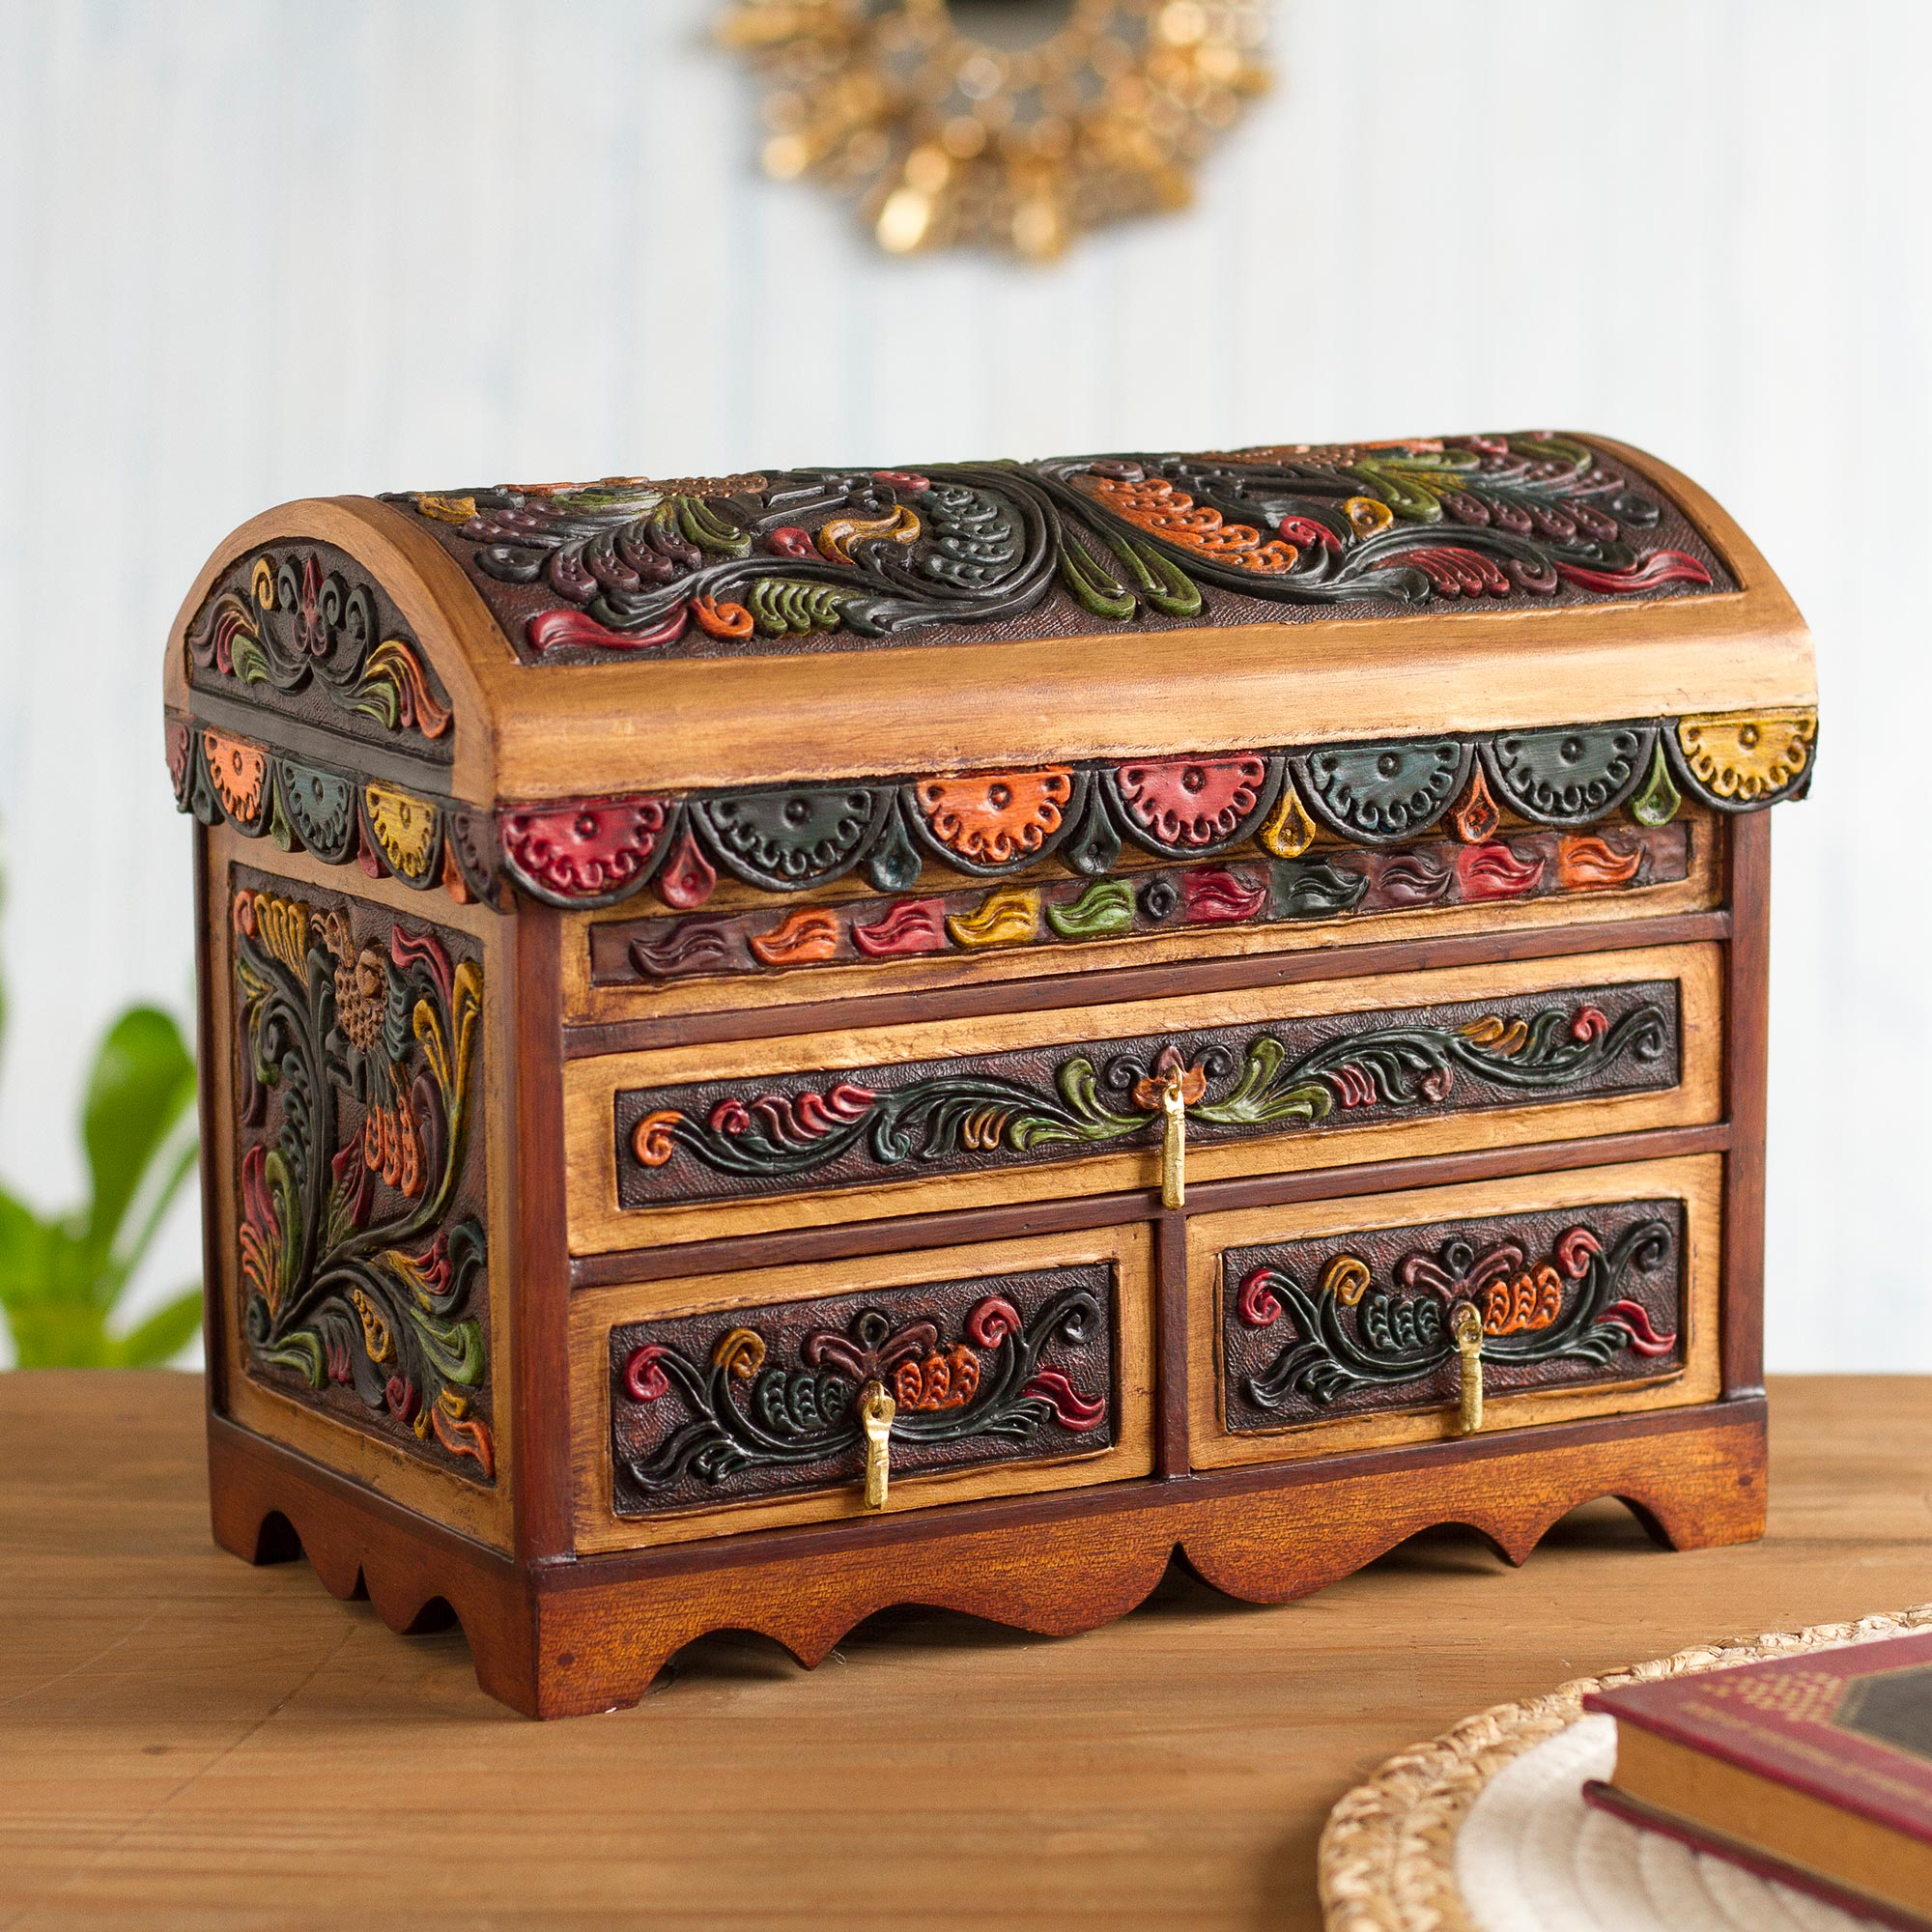 Multicolor Wood and Leather Jewelry Box from Peru - Antique